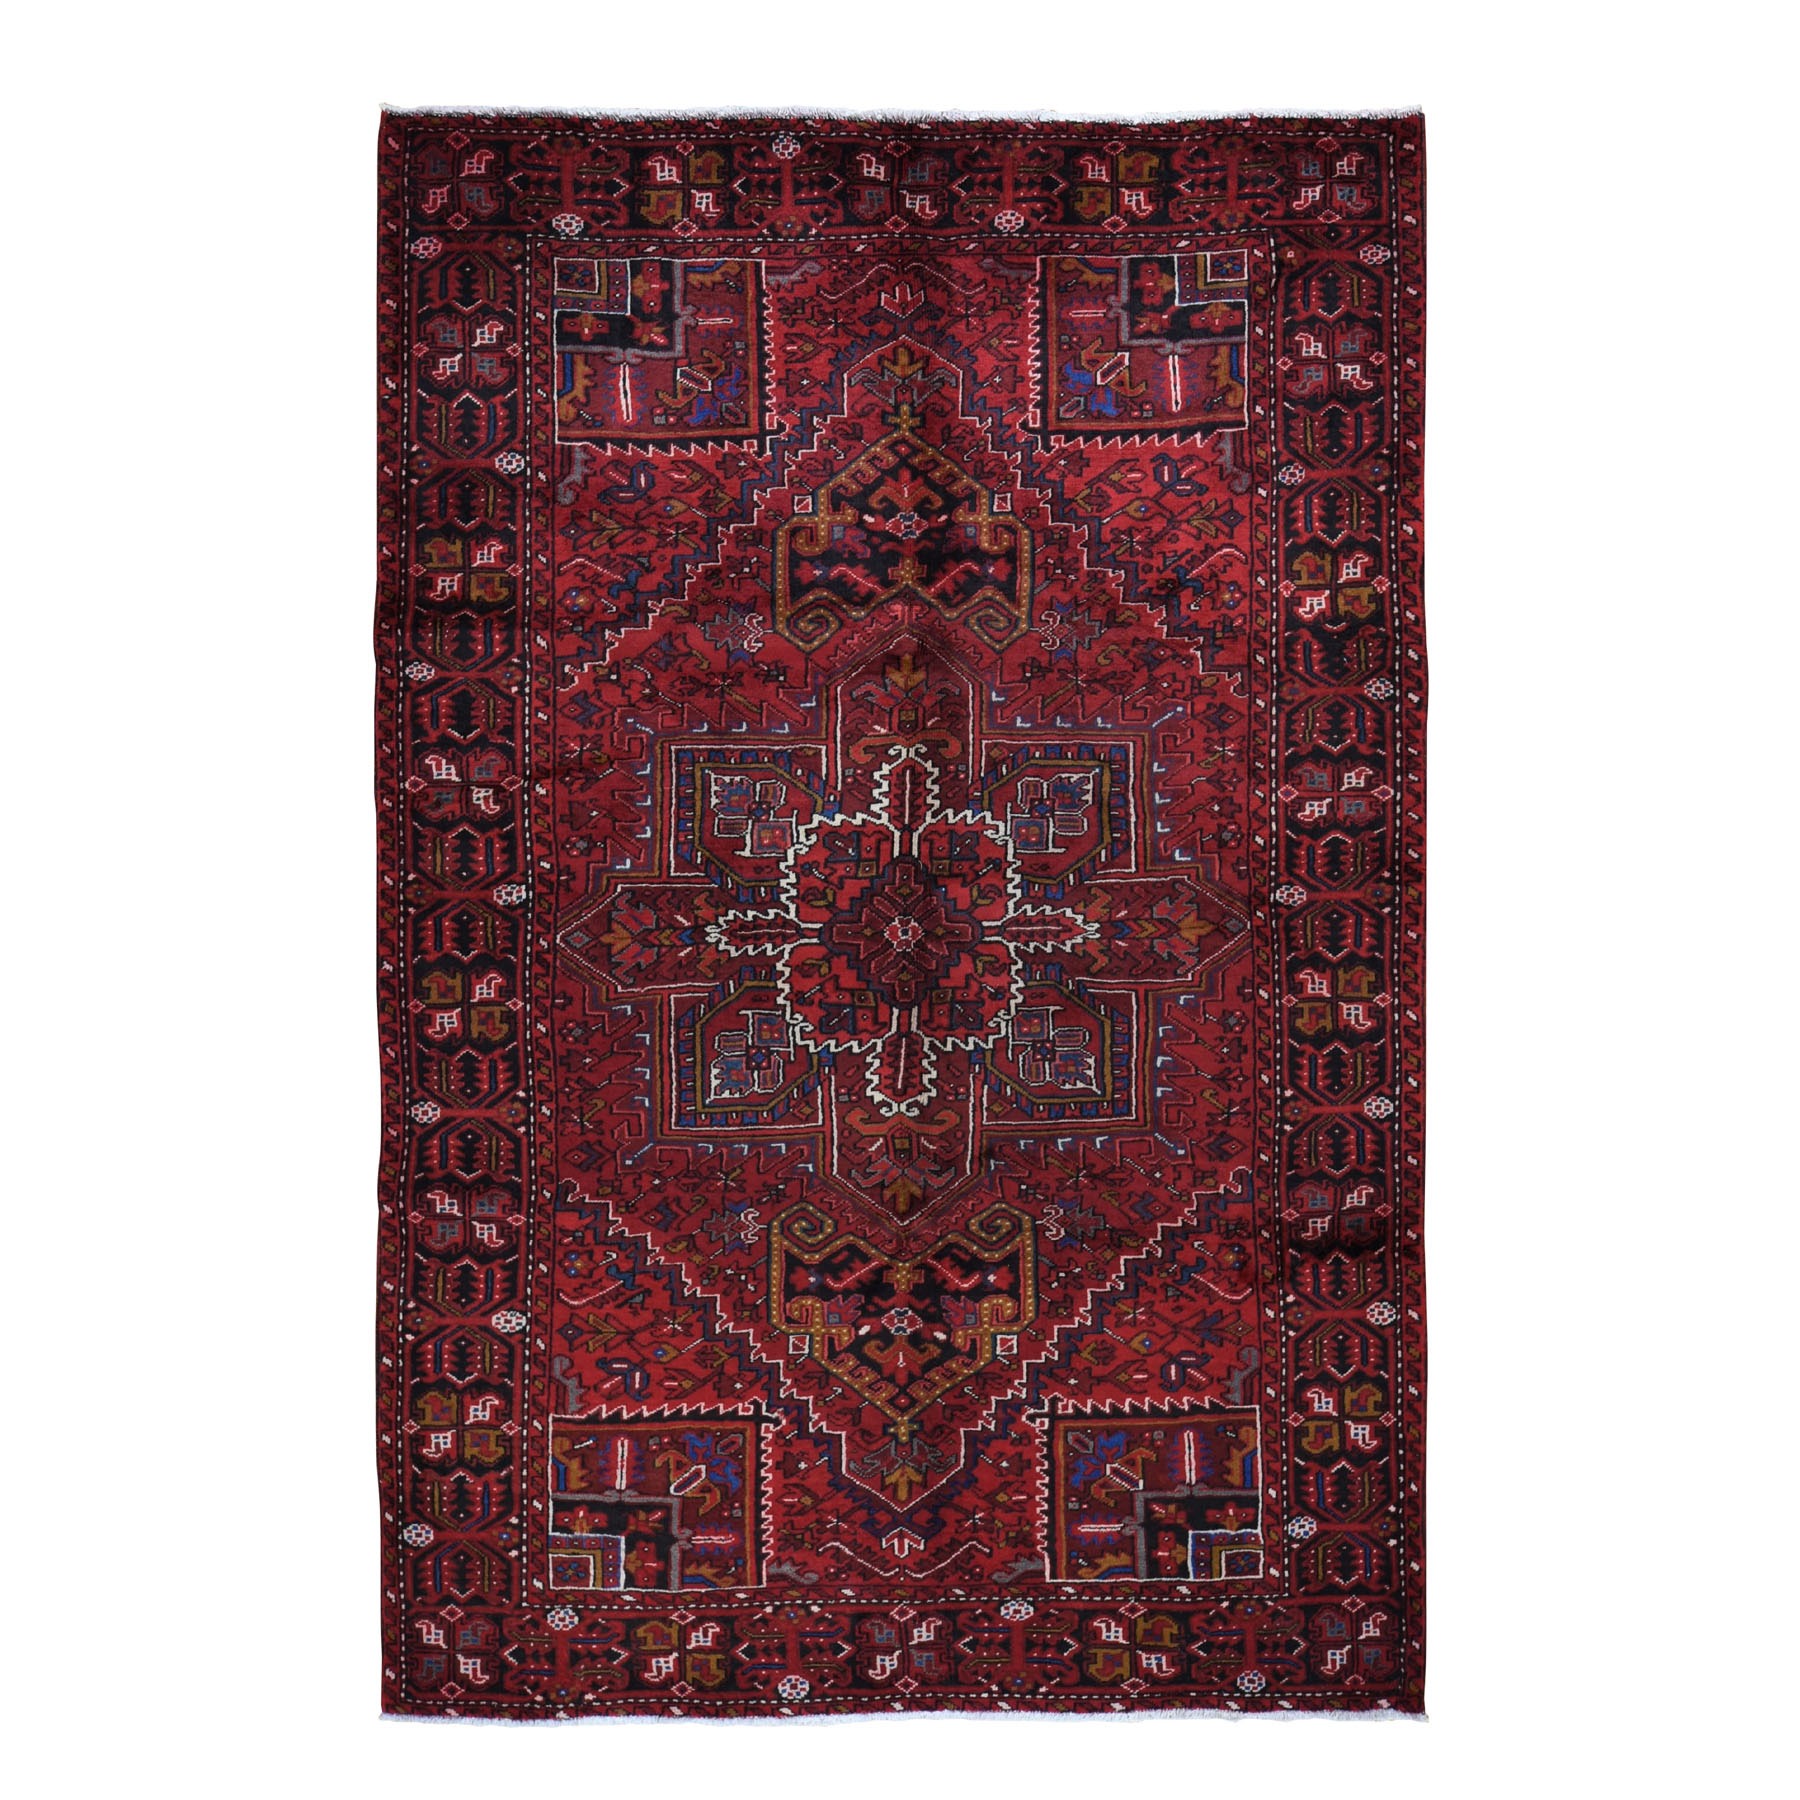 6'6"X9'5" Red Semi Antique Persian Heriz Geometric Design Thick And Plush Hand Knotted Oriental Rug moad8cb7